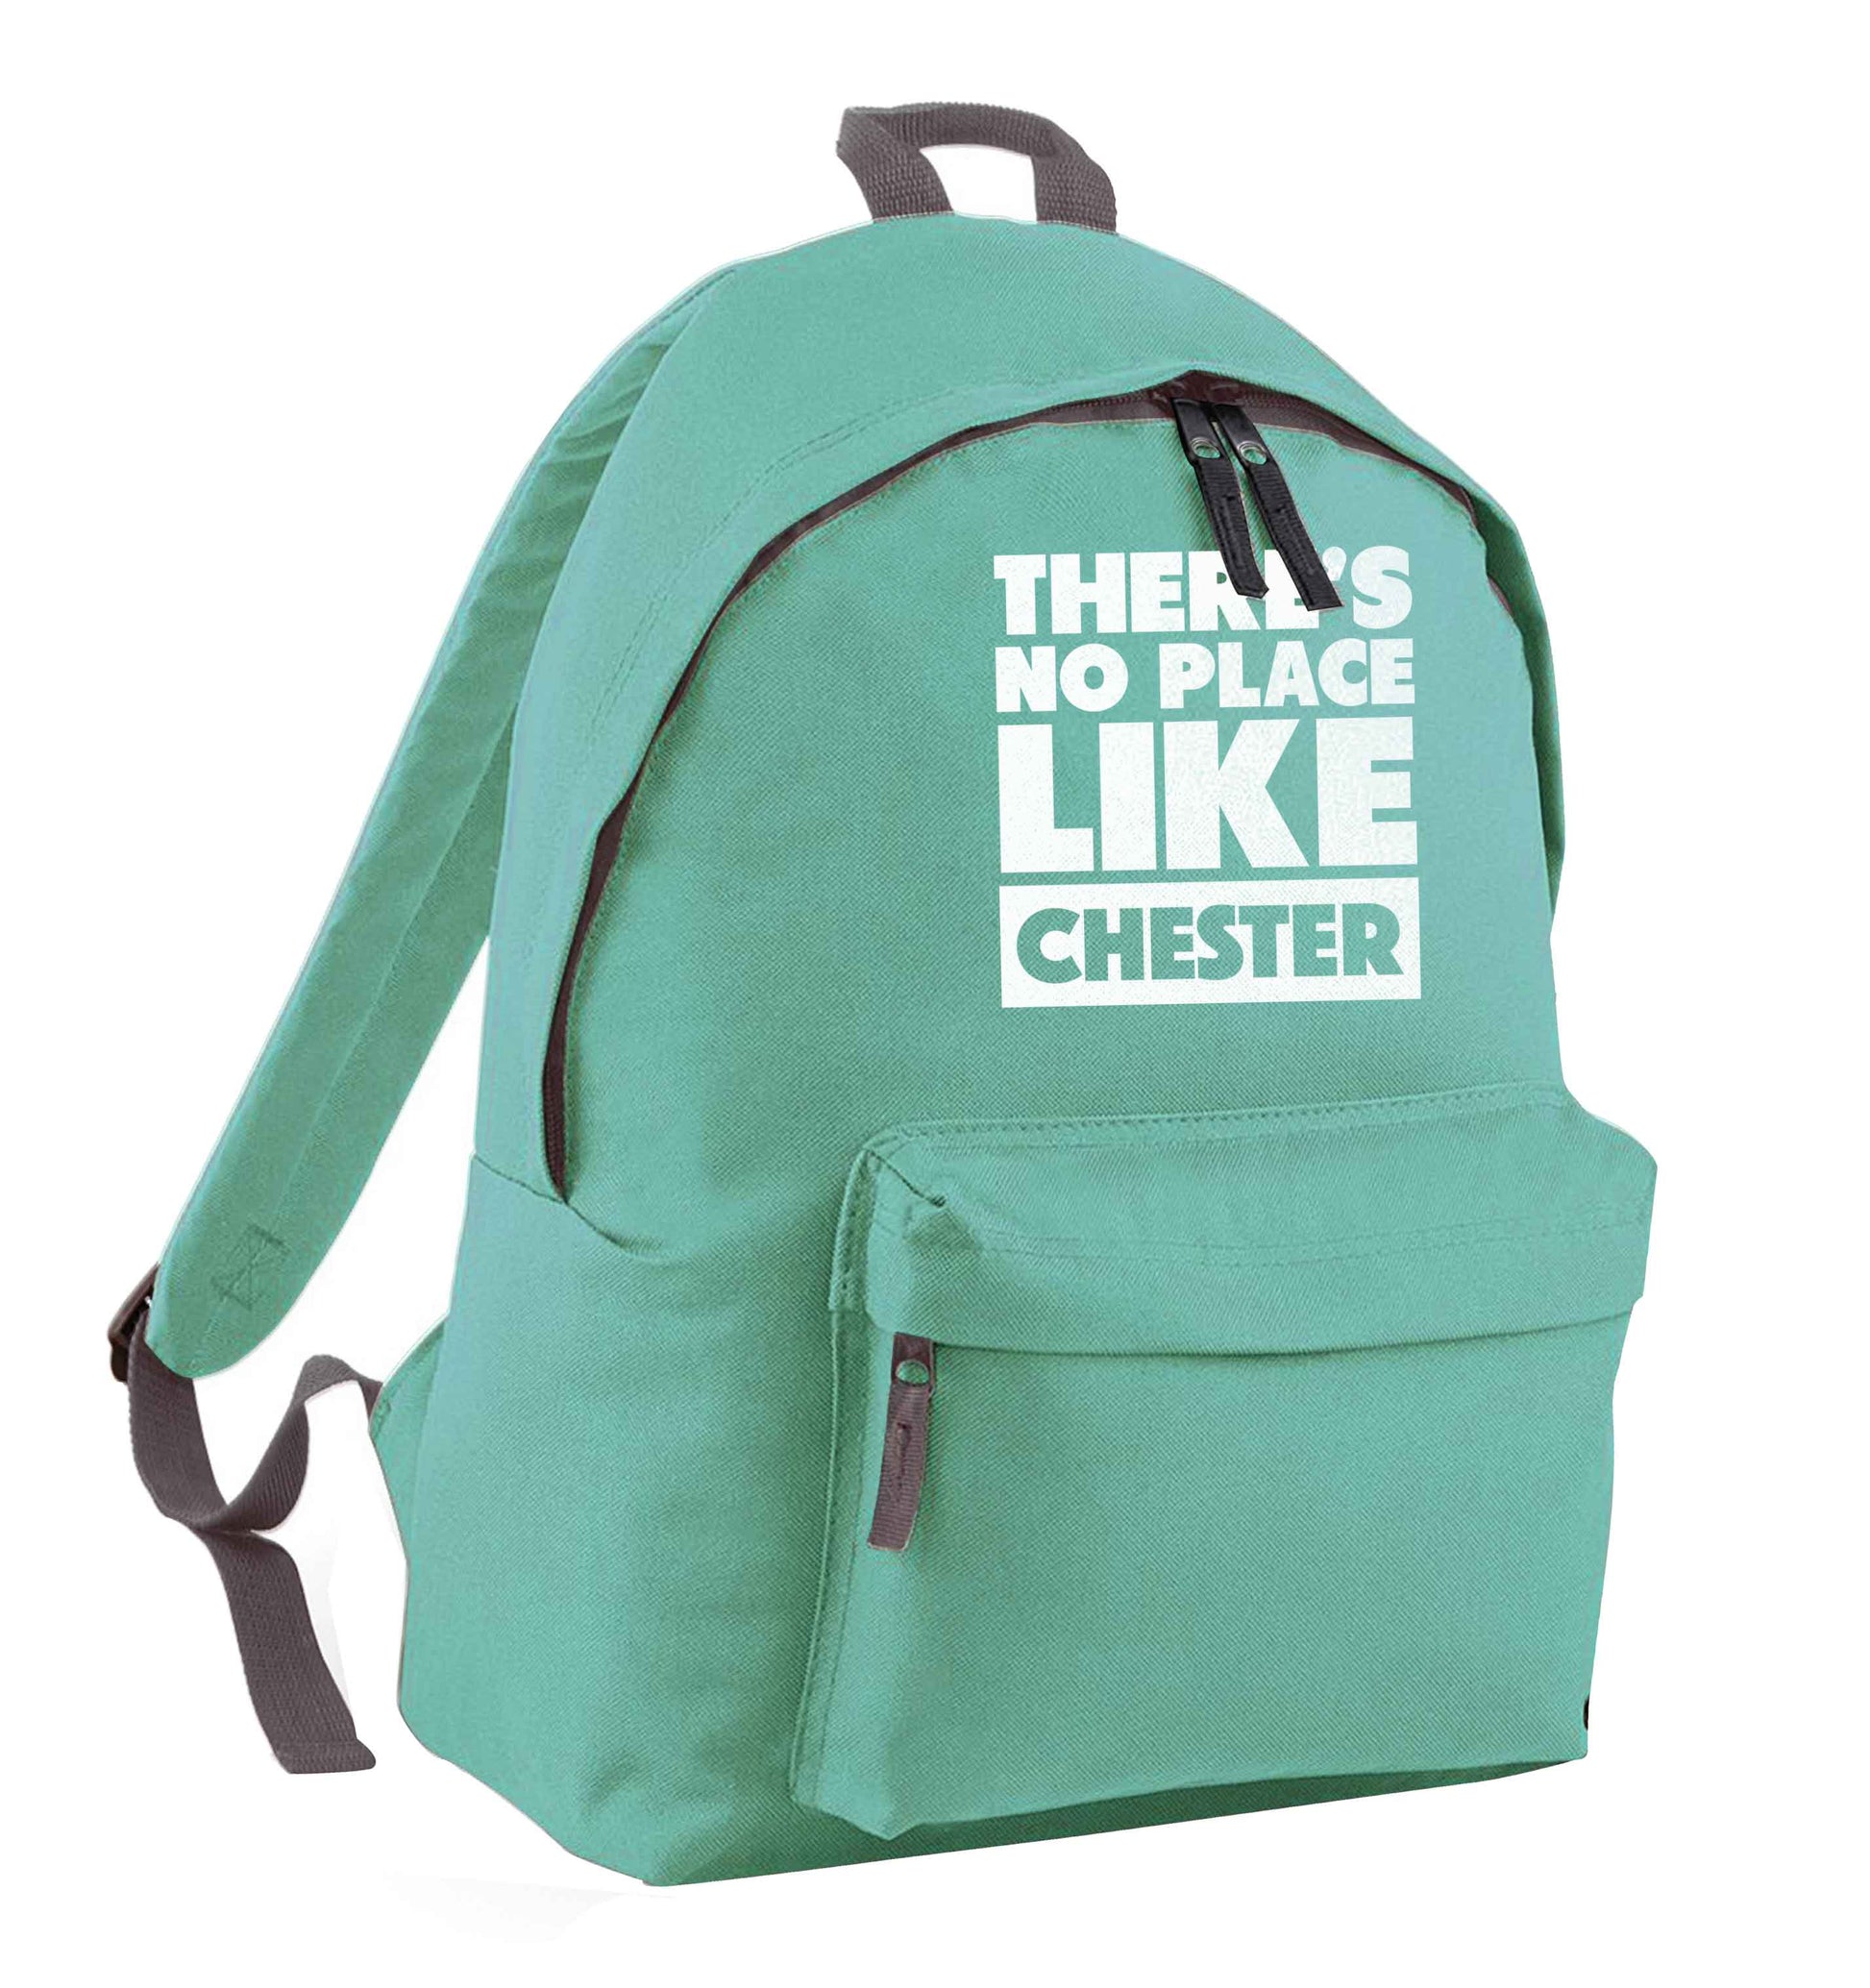 There's no place like Chester mint adults backpack